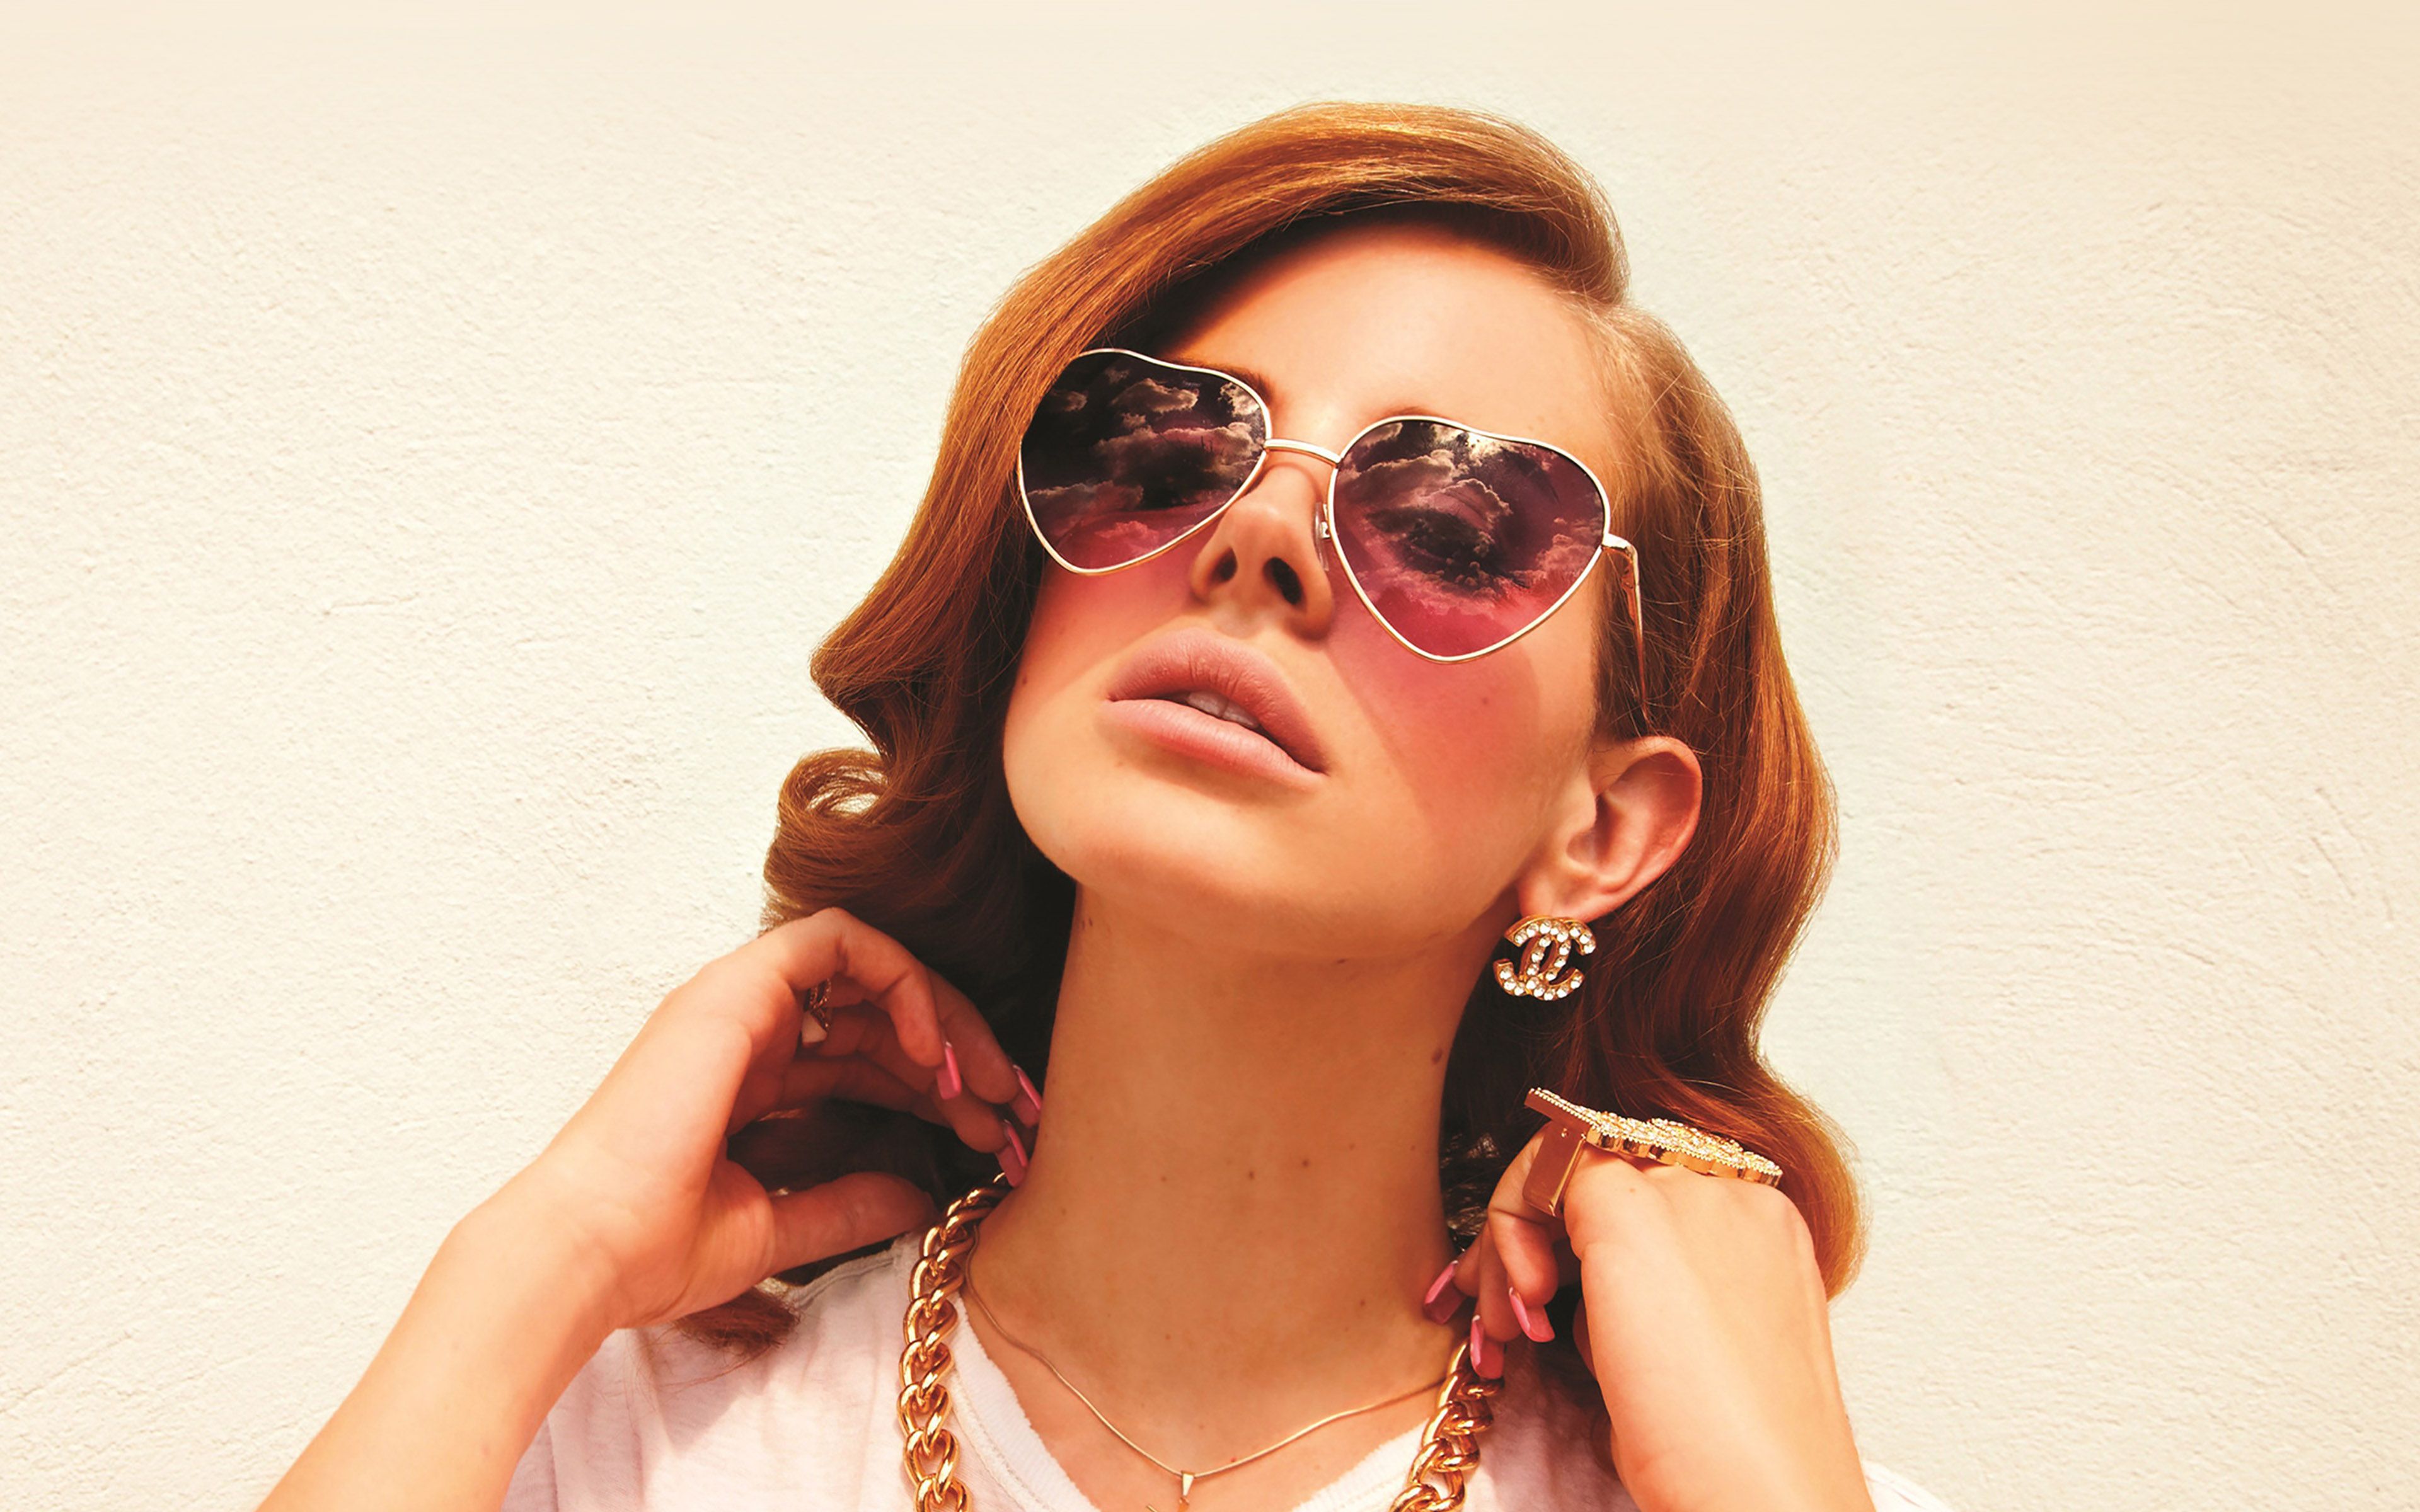 Close up of a woman wearing sunglasses and gold jewelry - Lana Del Rey